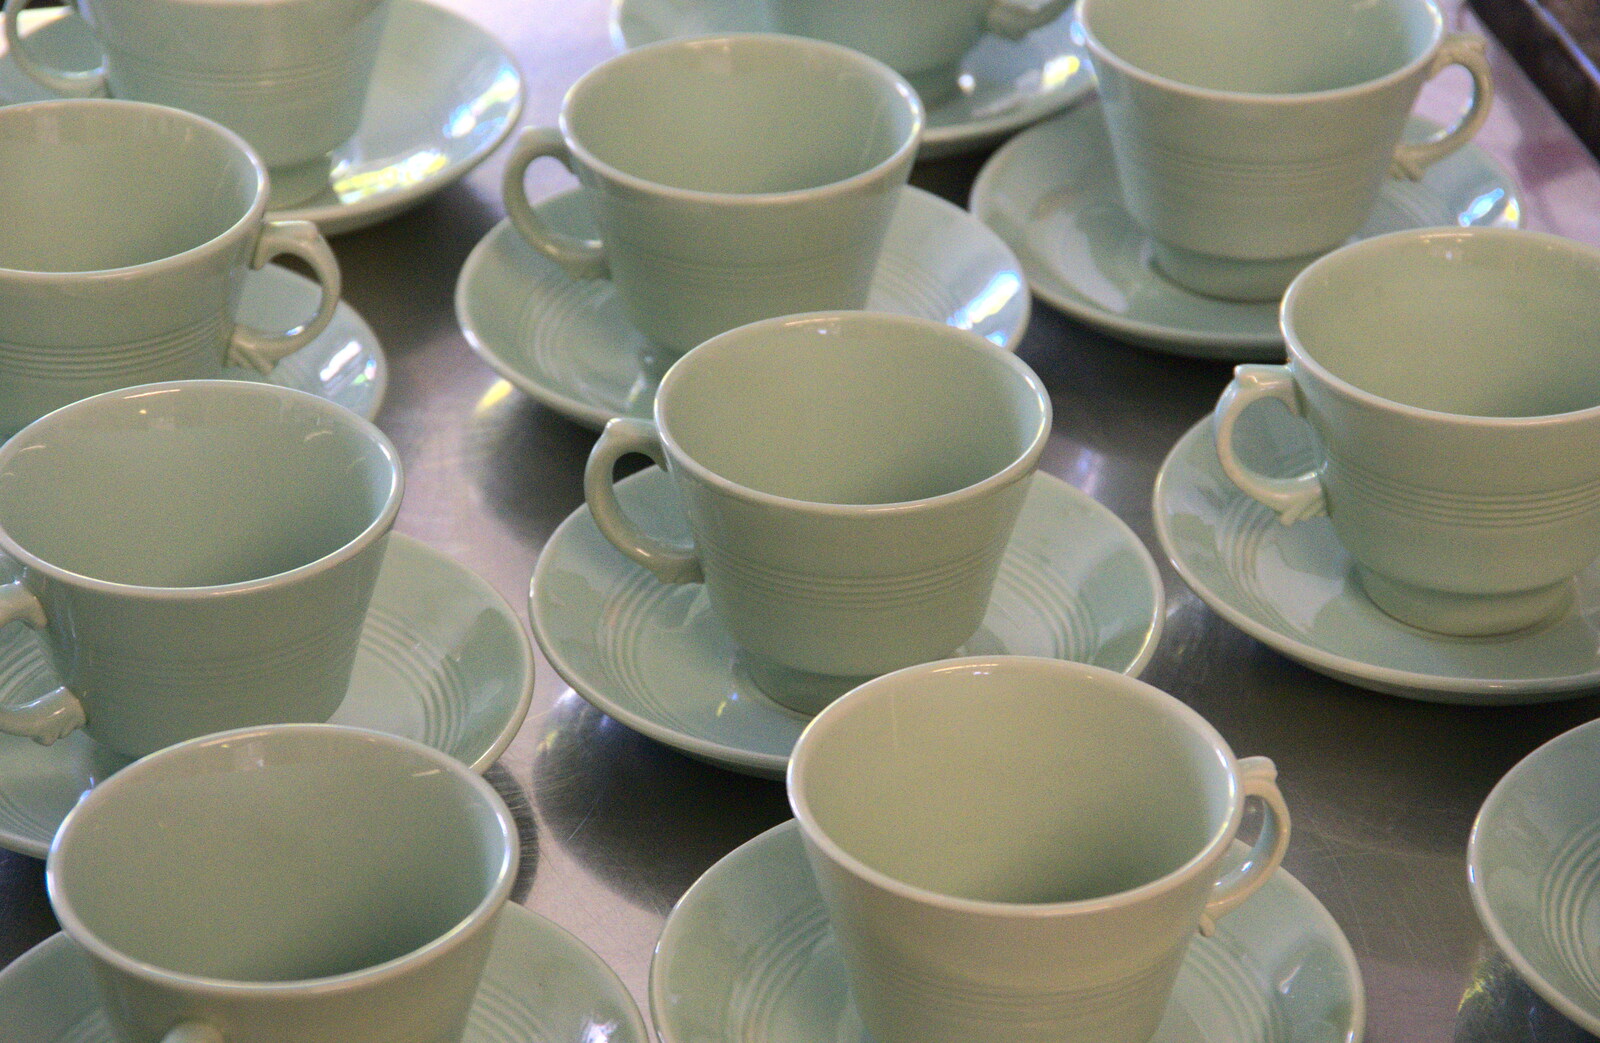 A million green tea cups from A Right Royal Wedding at the Village Hall, Brome, Suffolk - 19th May 2018